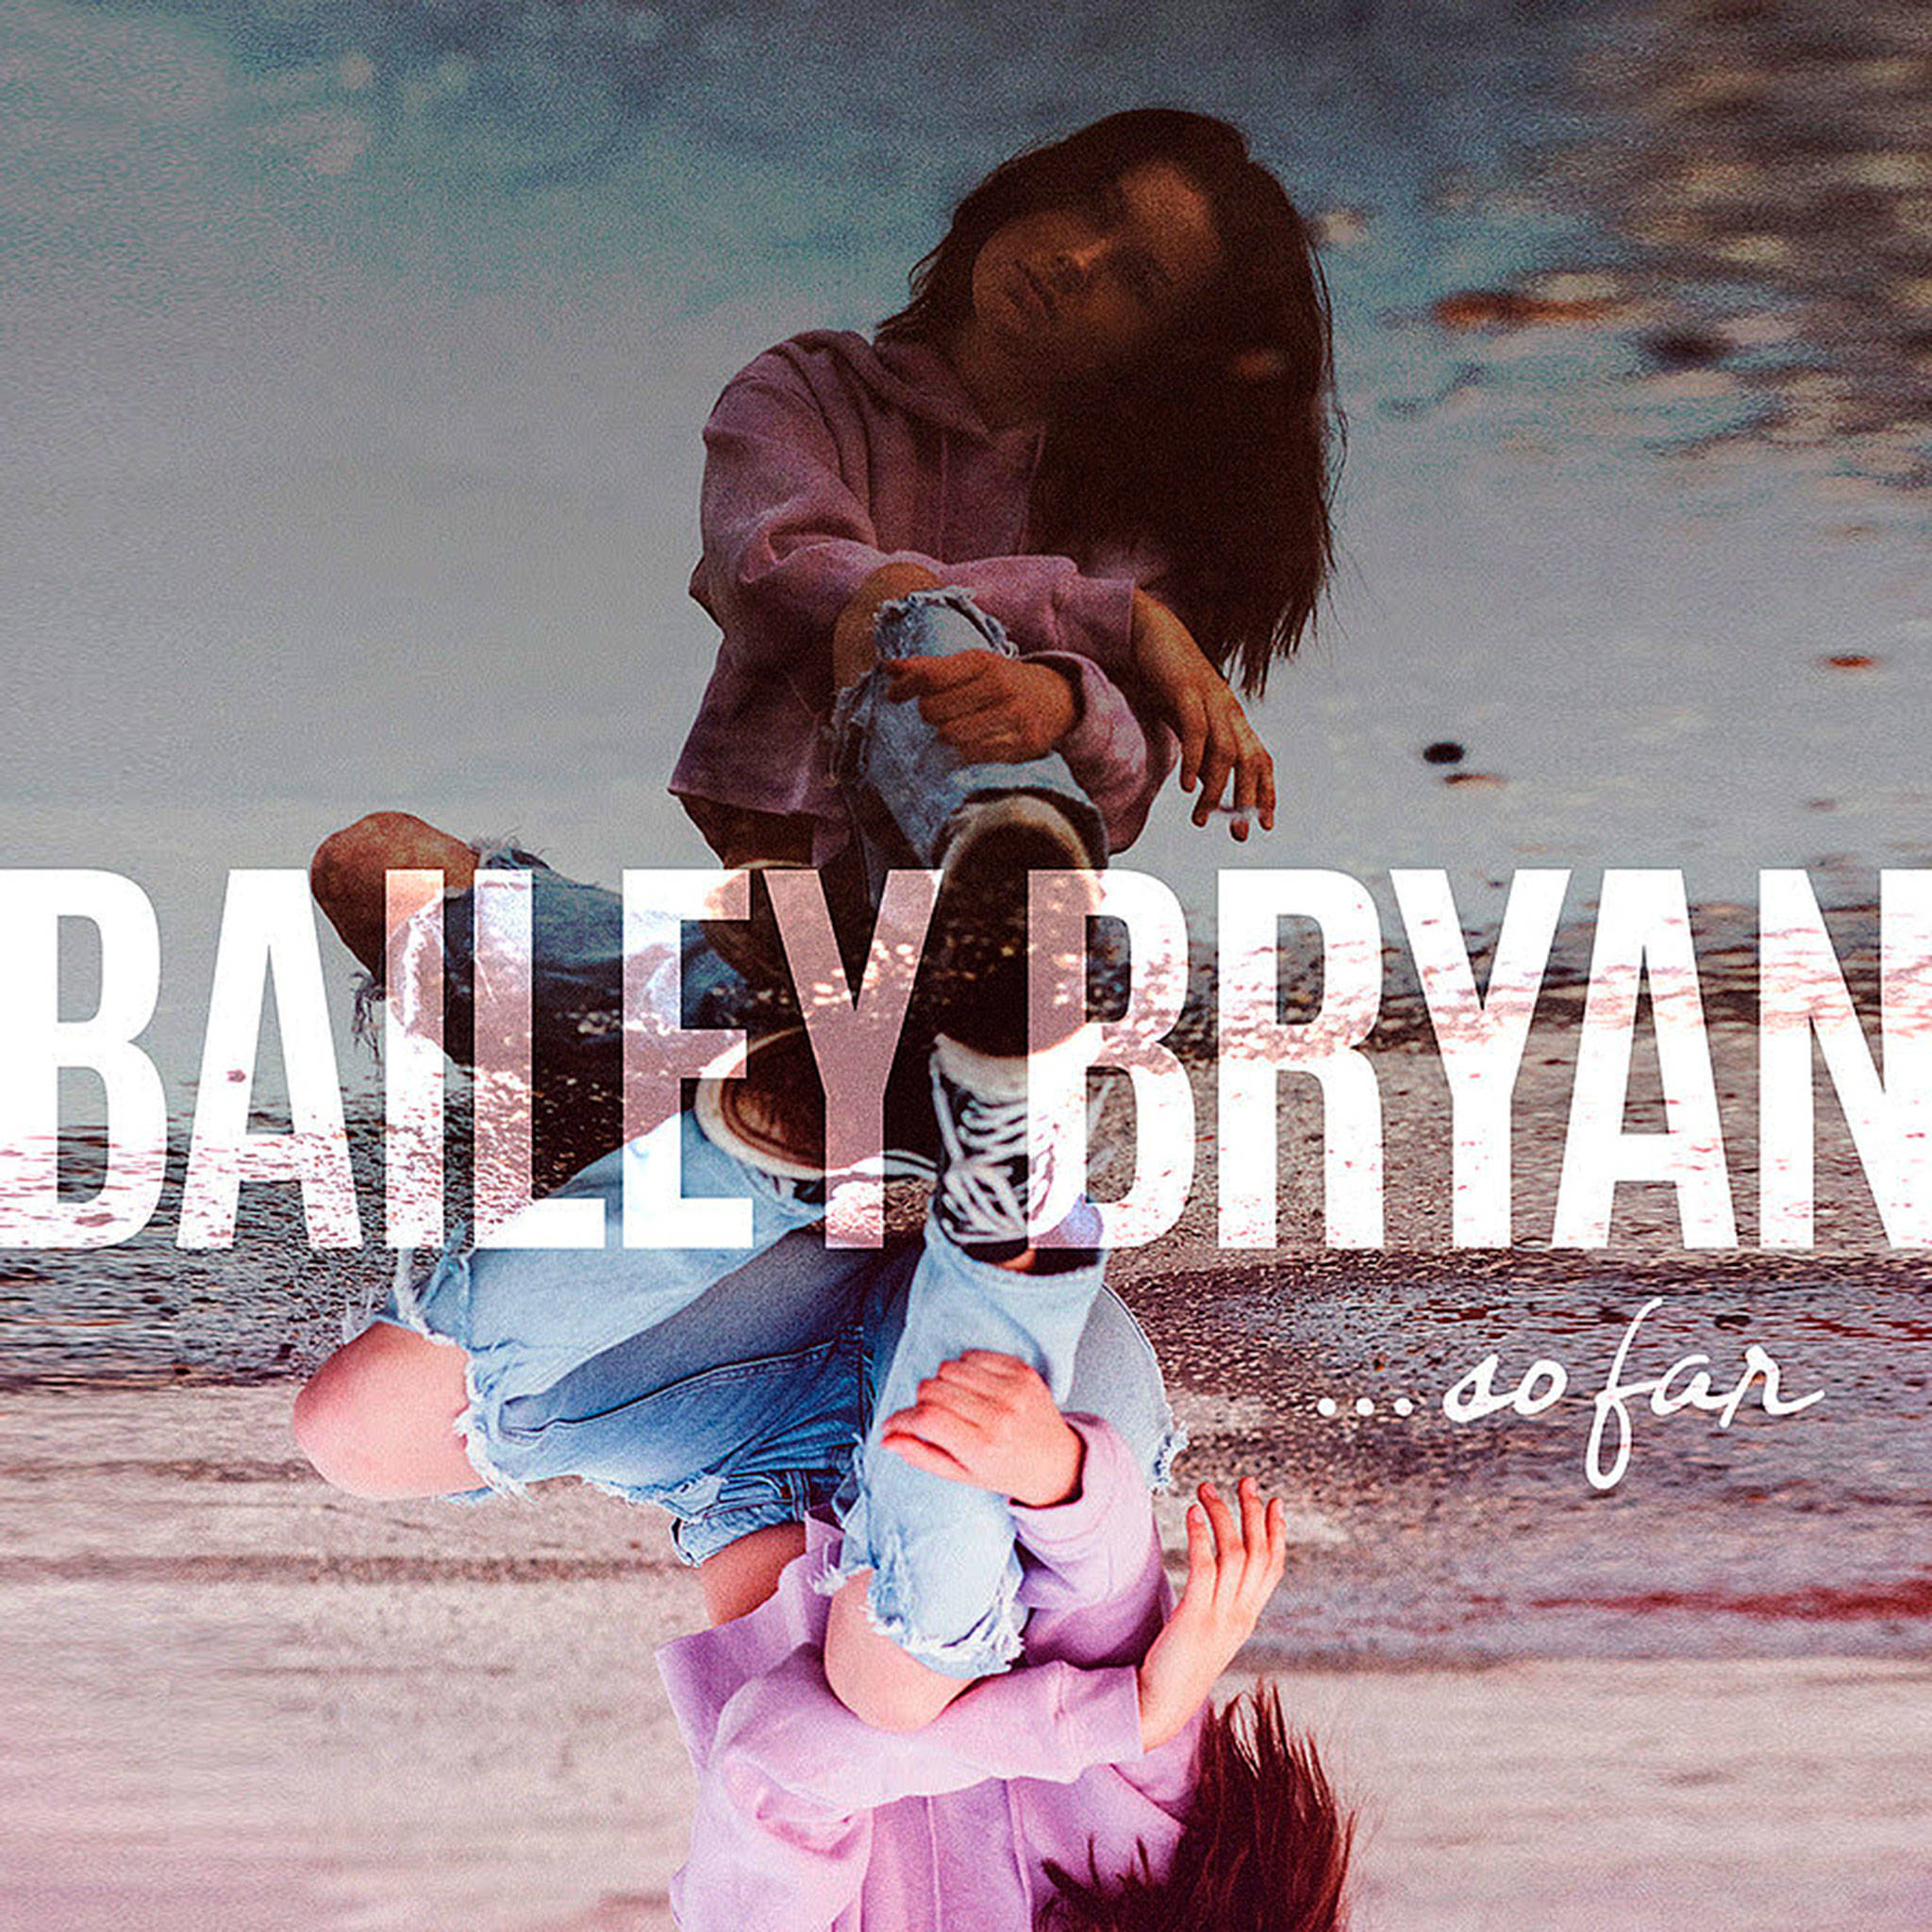 Bailey Bryan releases her first album “So Far” on April 14. It includes five songs and is available for download and streaming at major music websites. Submitted photos